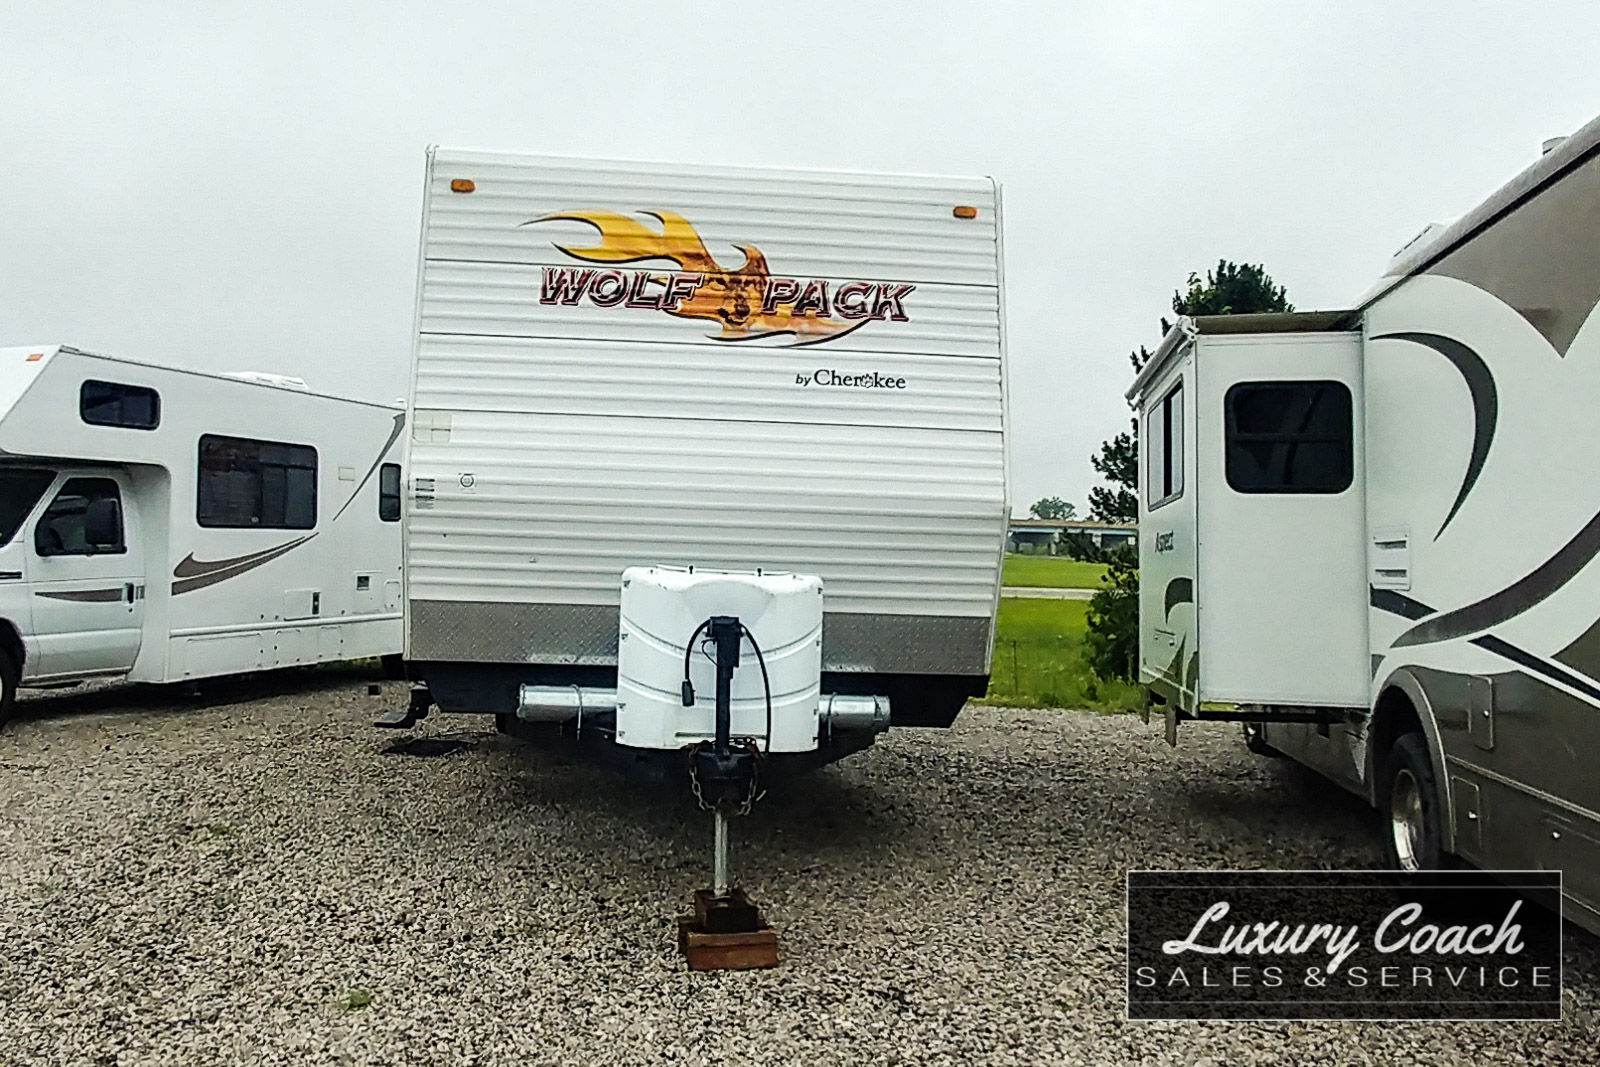 Luxury Coach | 2007 Forest River Cherokee Wolf Pack For Sale - SOLD 2007 Wolfpack Toy Hauler For Sale